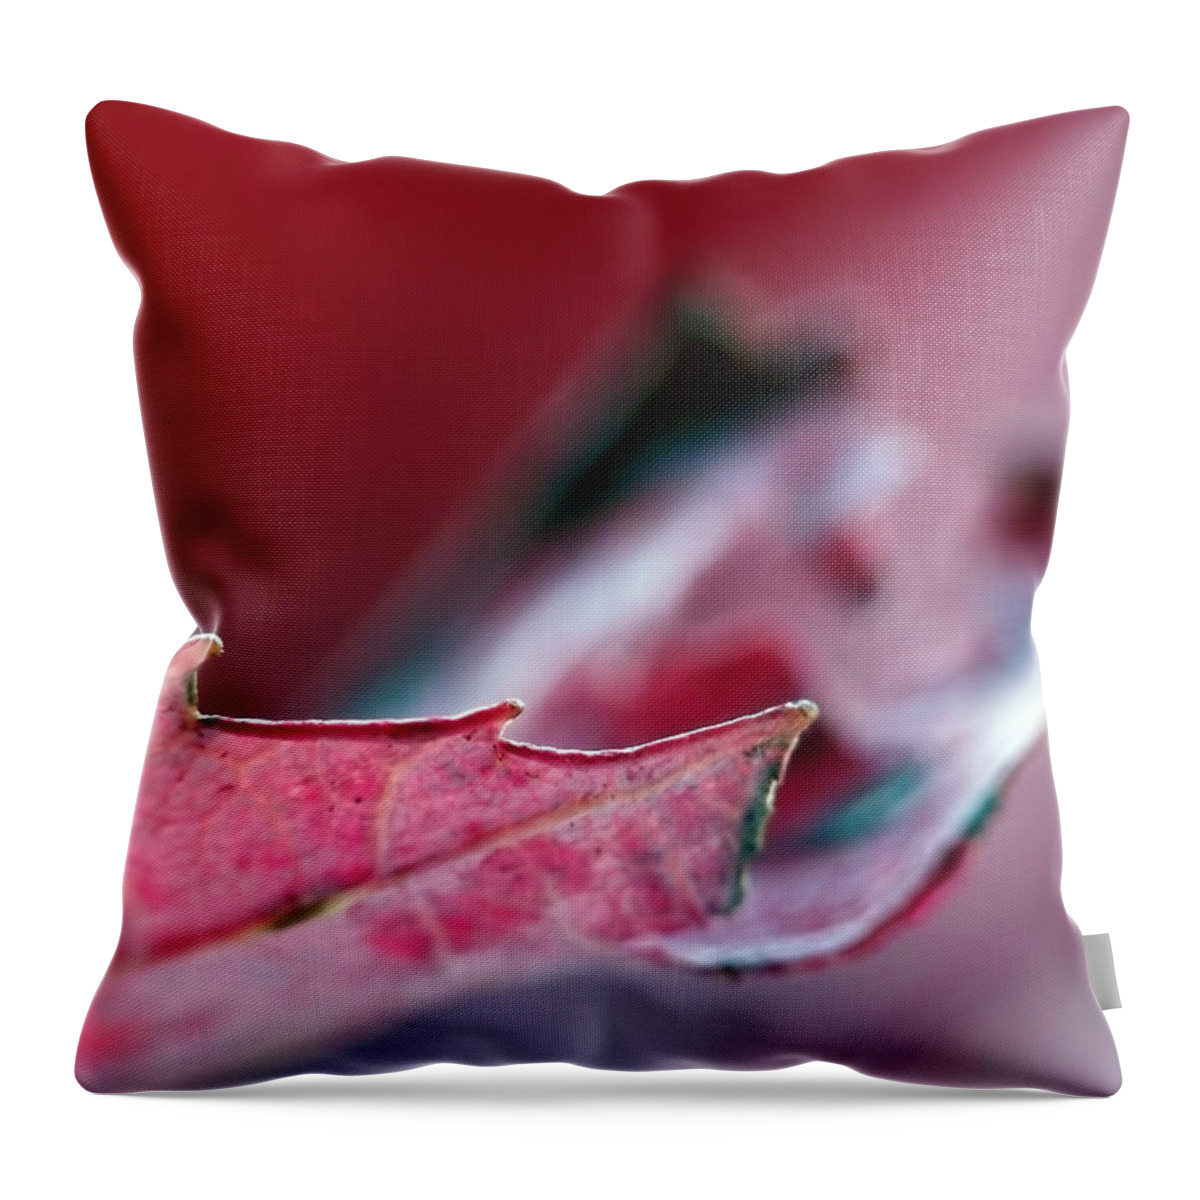 Abstract Throw Pillow featuring the photograph Falling I by Lauren Radke